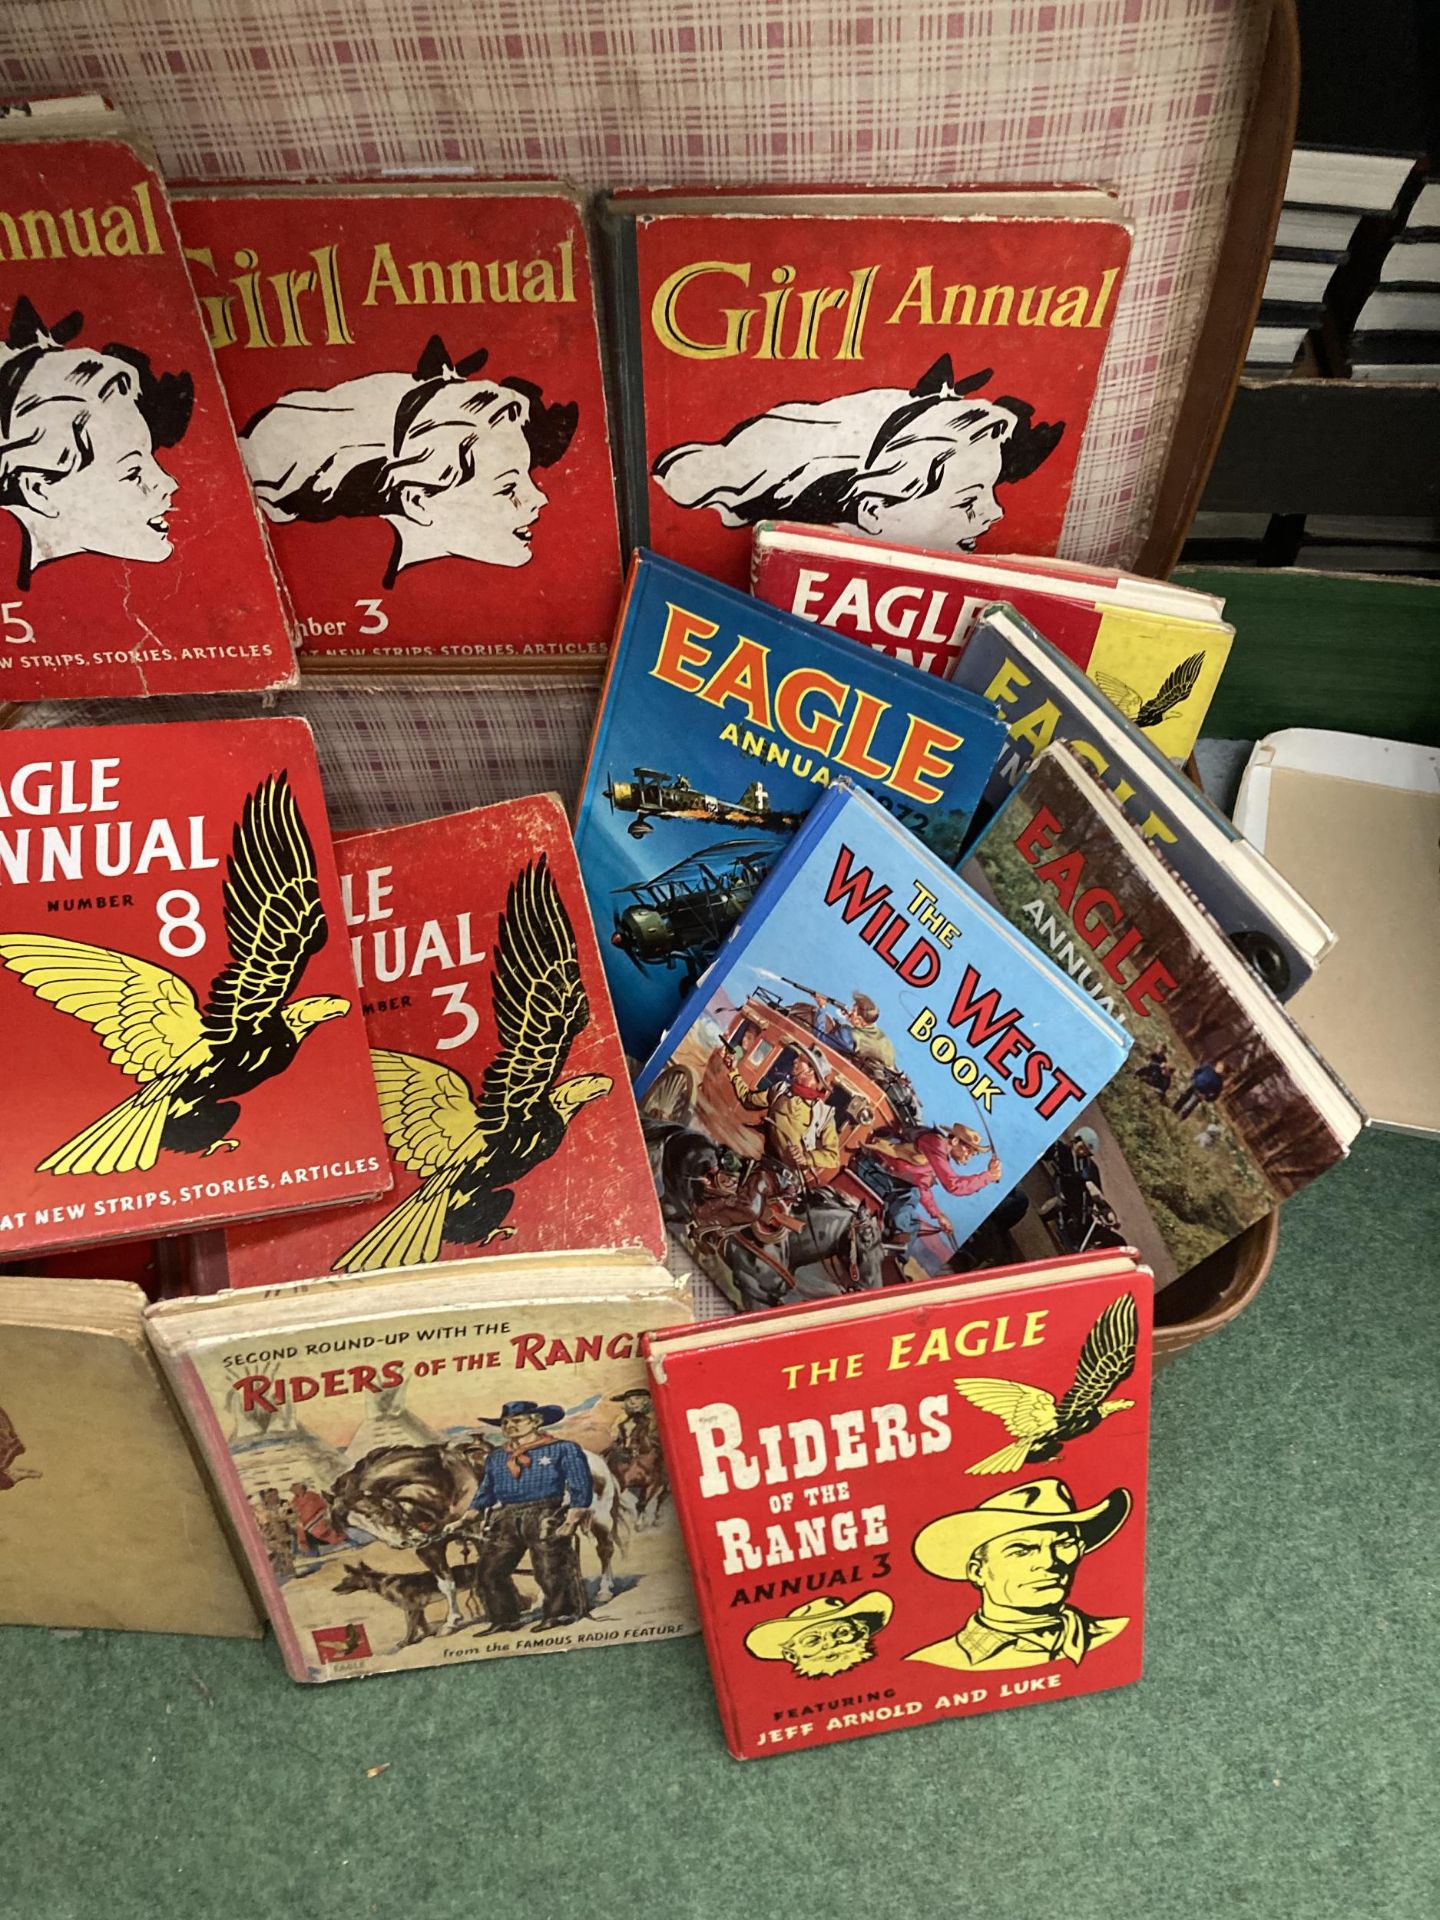 A COLLECTION OF VINTAGE EAGLE AND GIRL ANNUAL BOOKS - Image 2 of 4